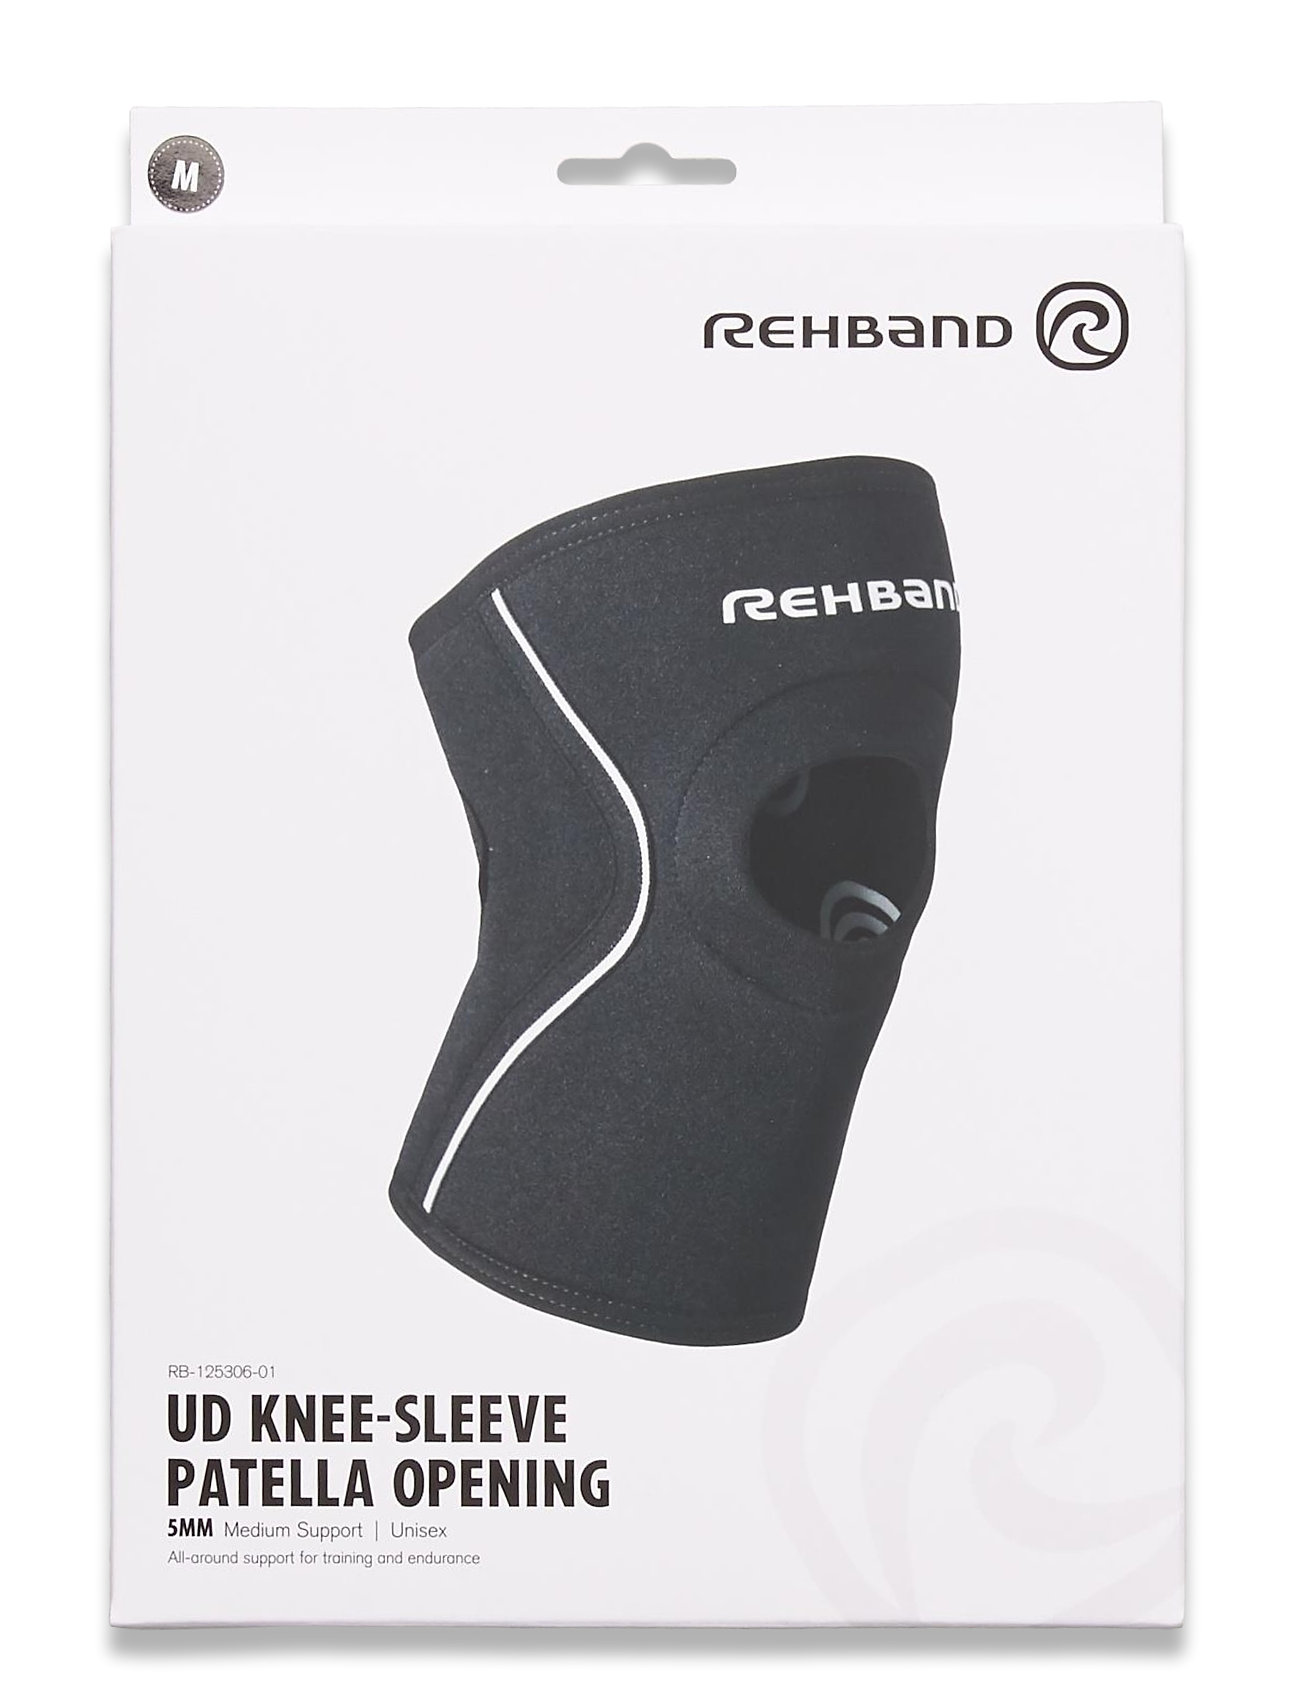 Ud Knee-Sleeve Patella Open 5mm Accessories Sports Equipment Braces & Supports Knee Support Musta Rehband